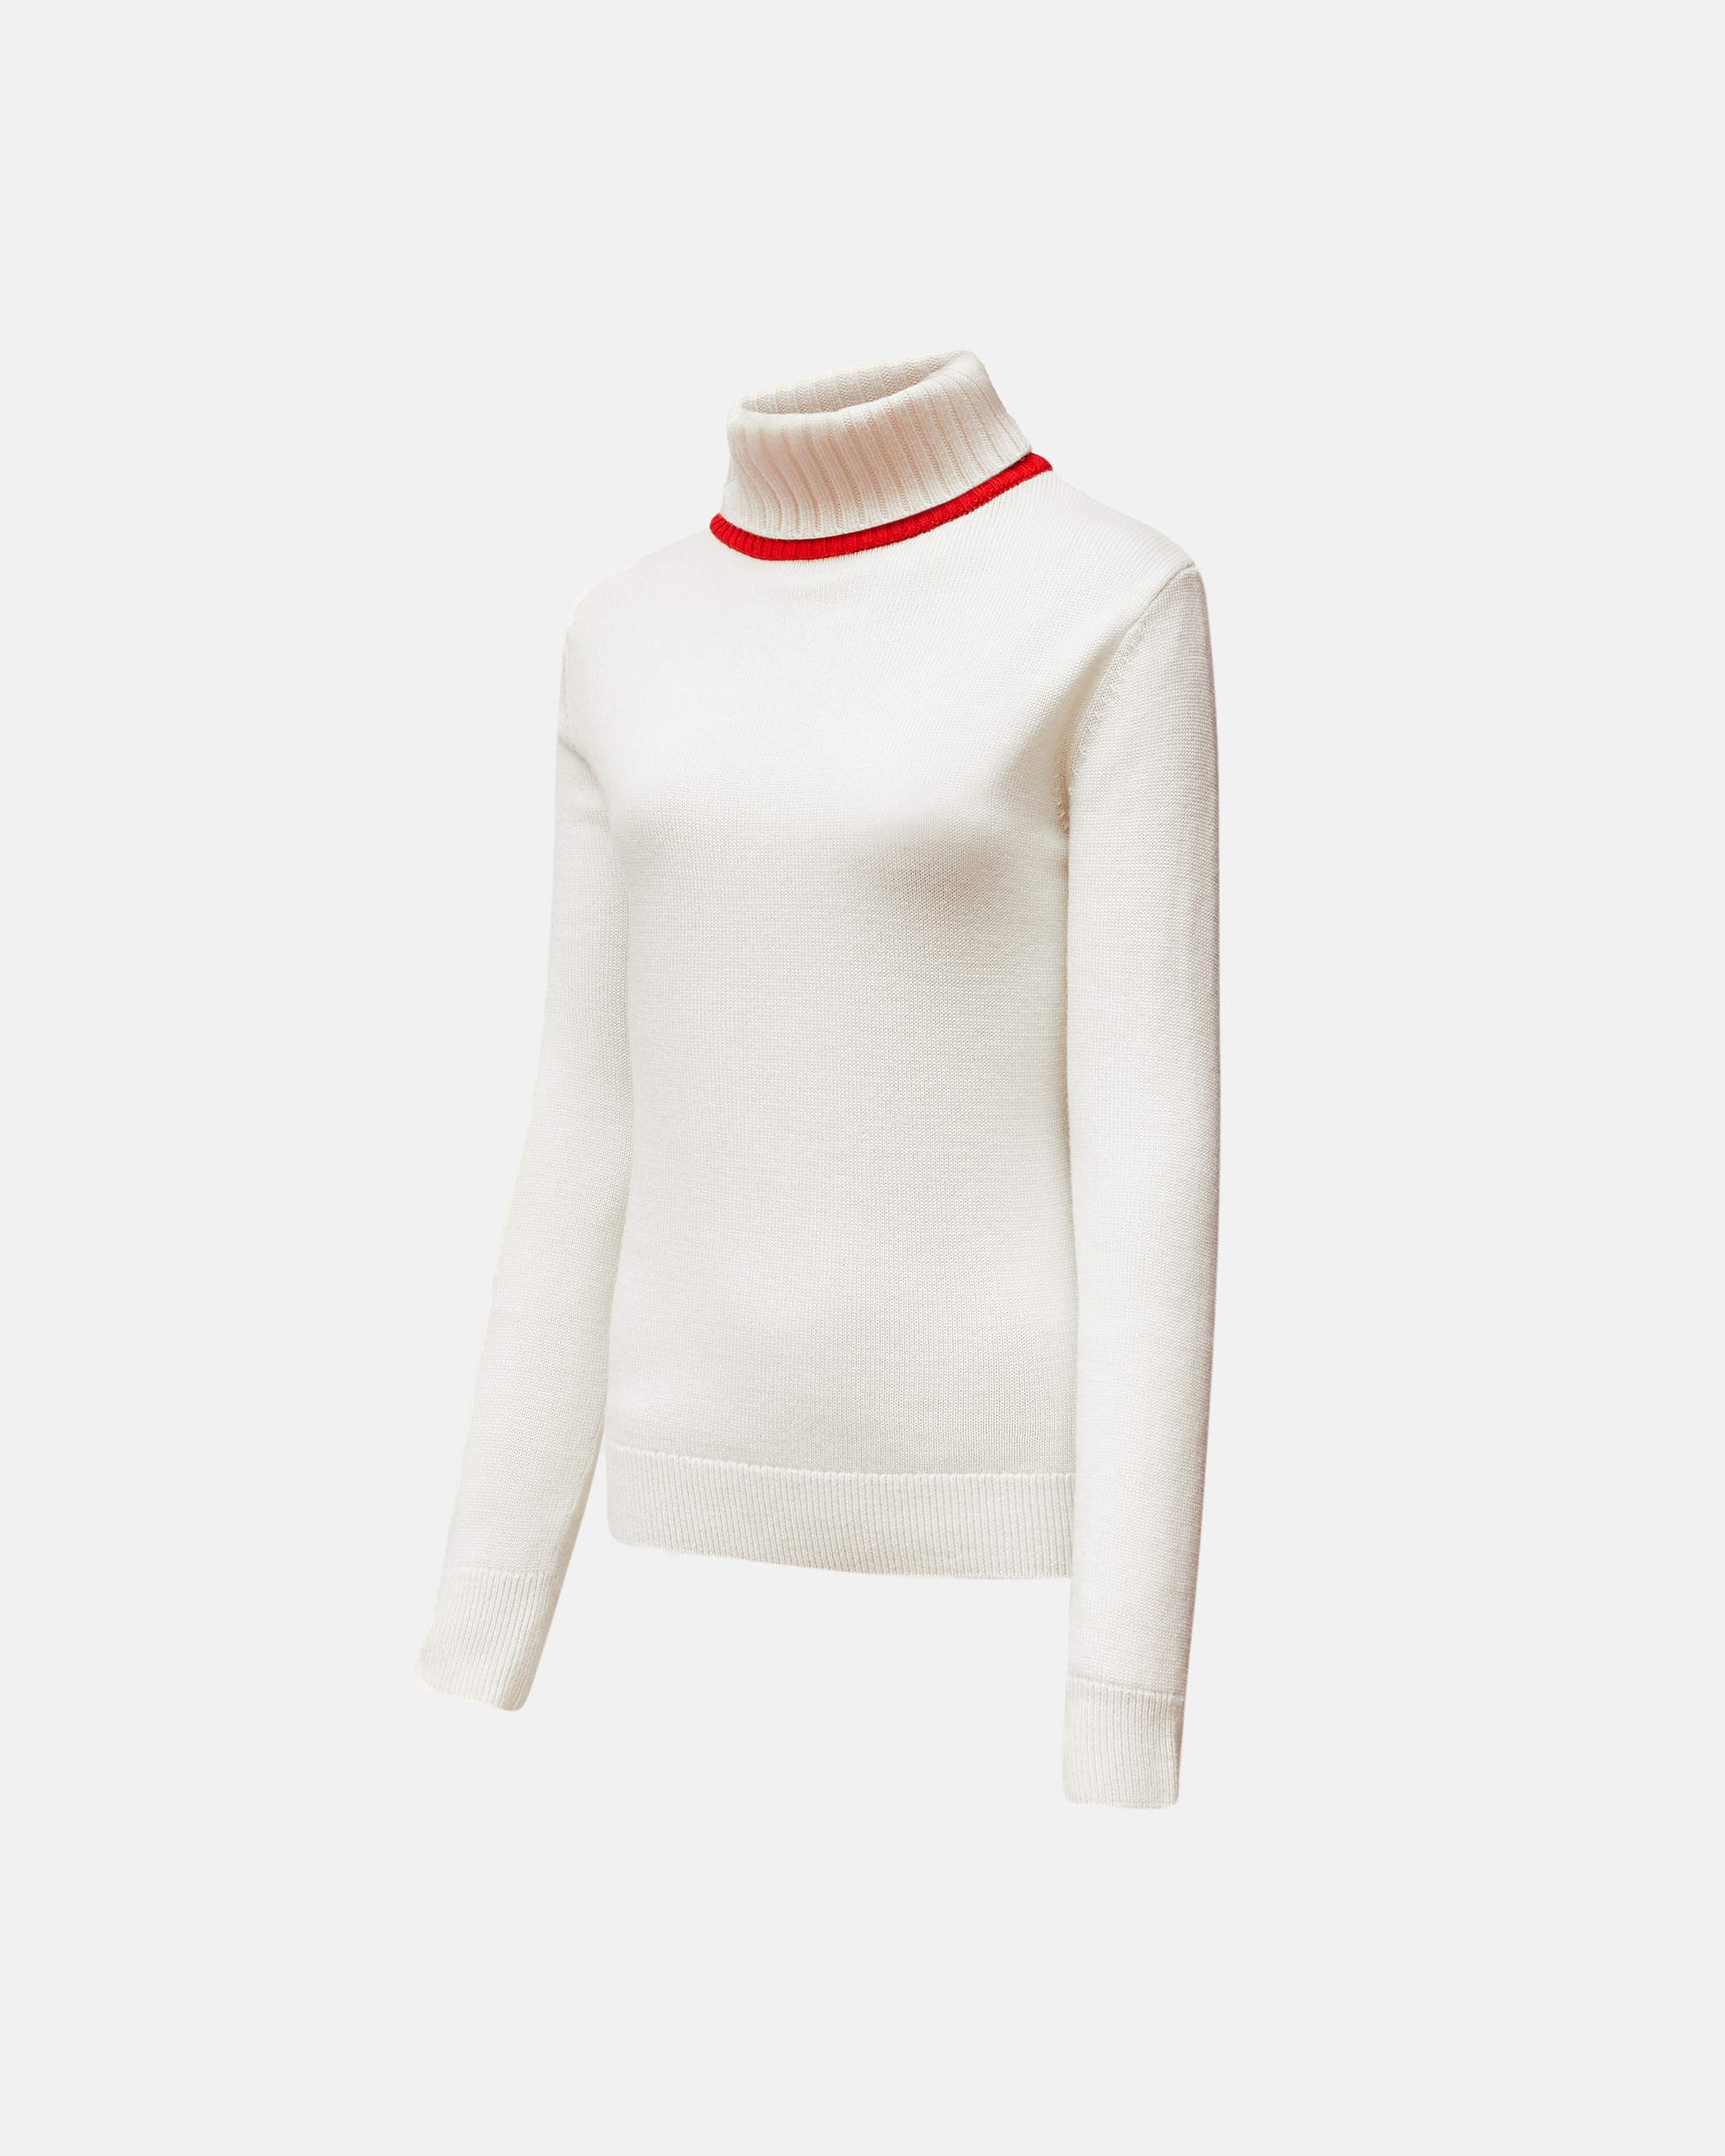 Perfect Moment Merino Wool Turtleneck Jumper Xl In Snow-white